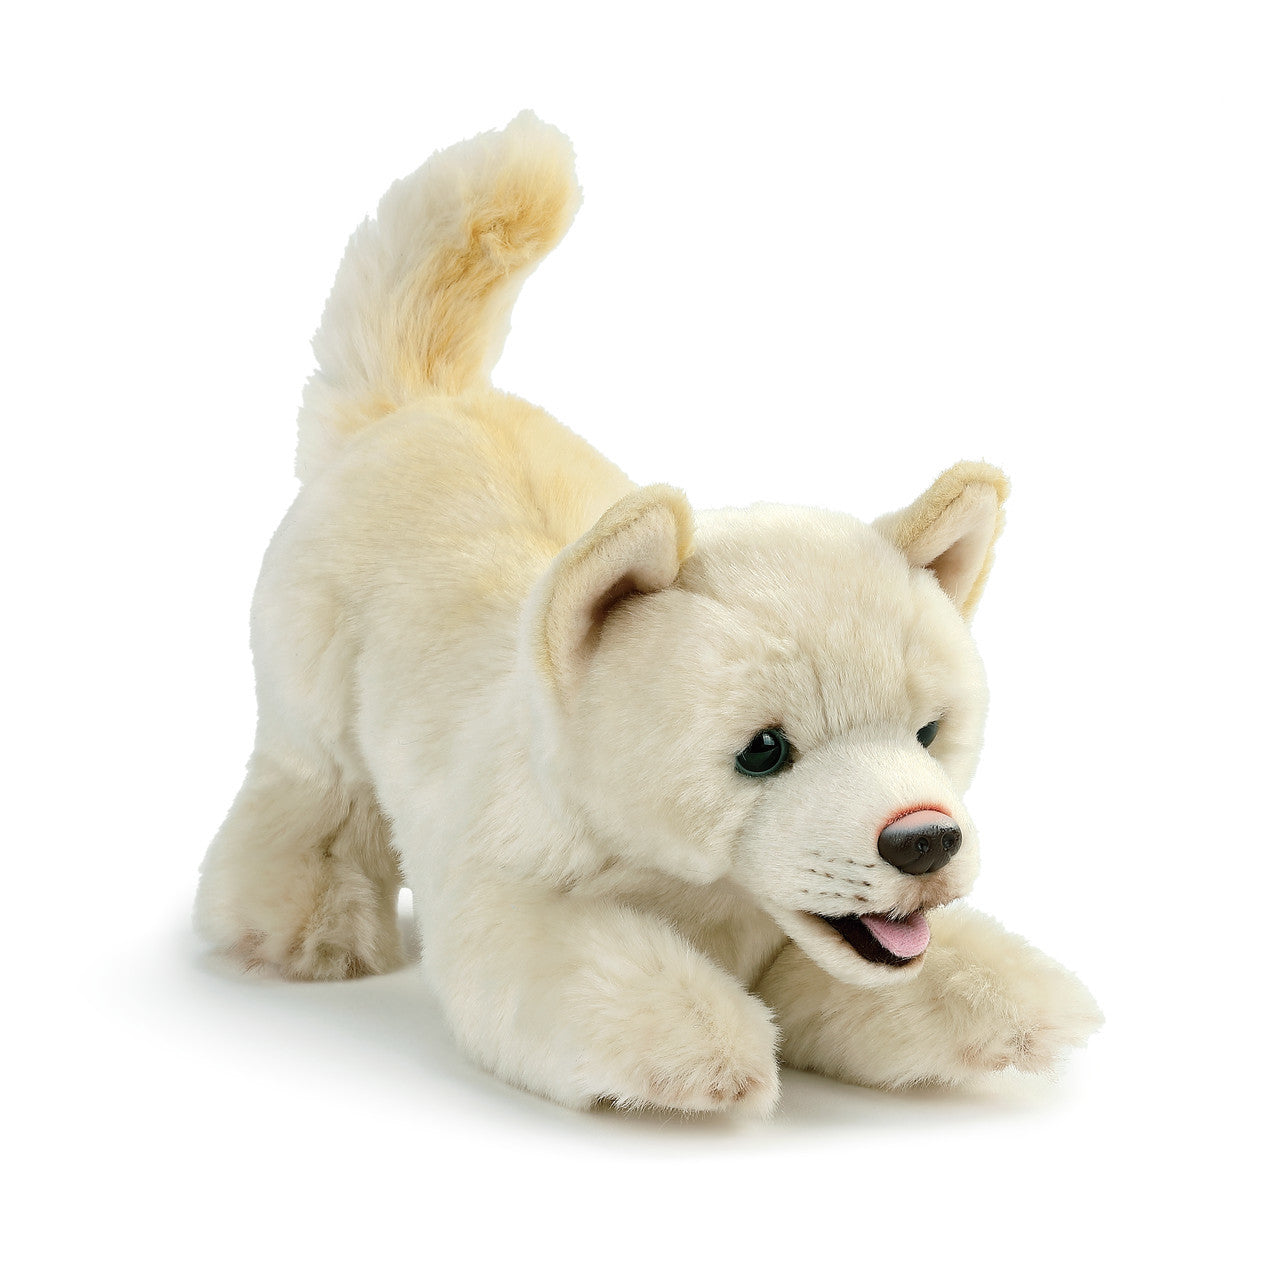 White Mix Rescue Breed Plush Toy - small/med